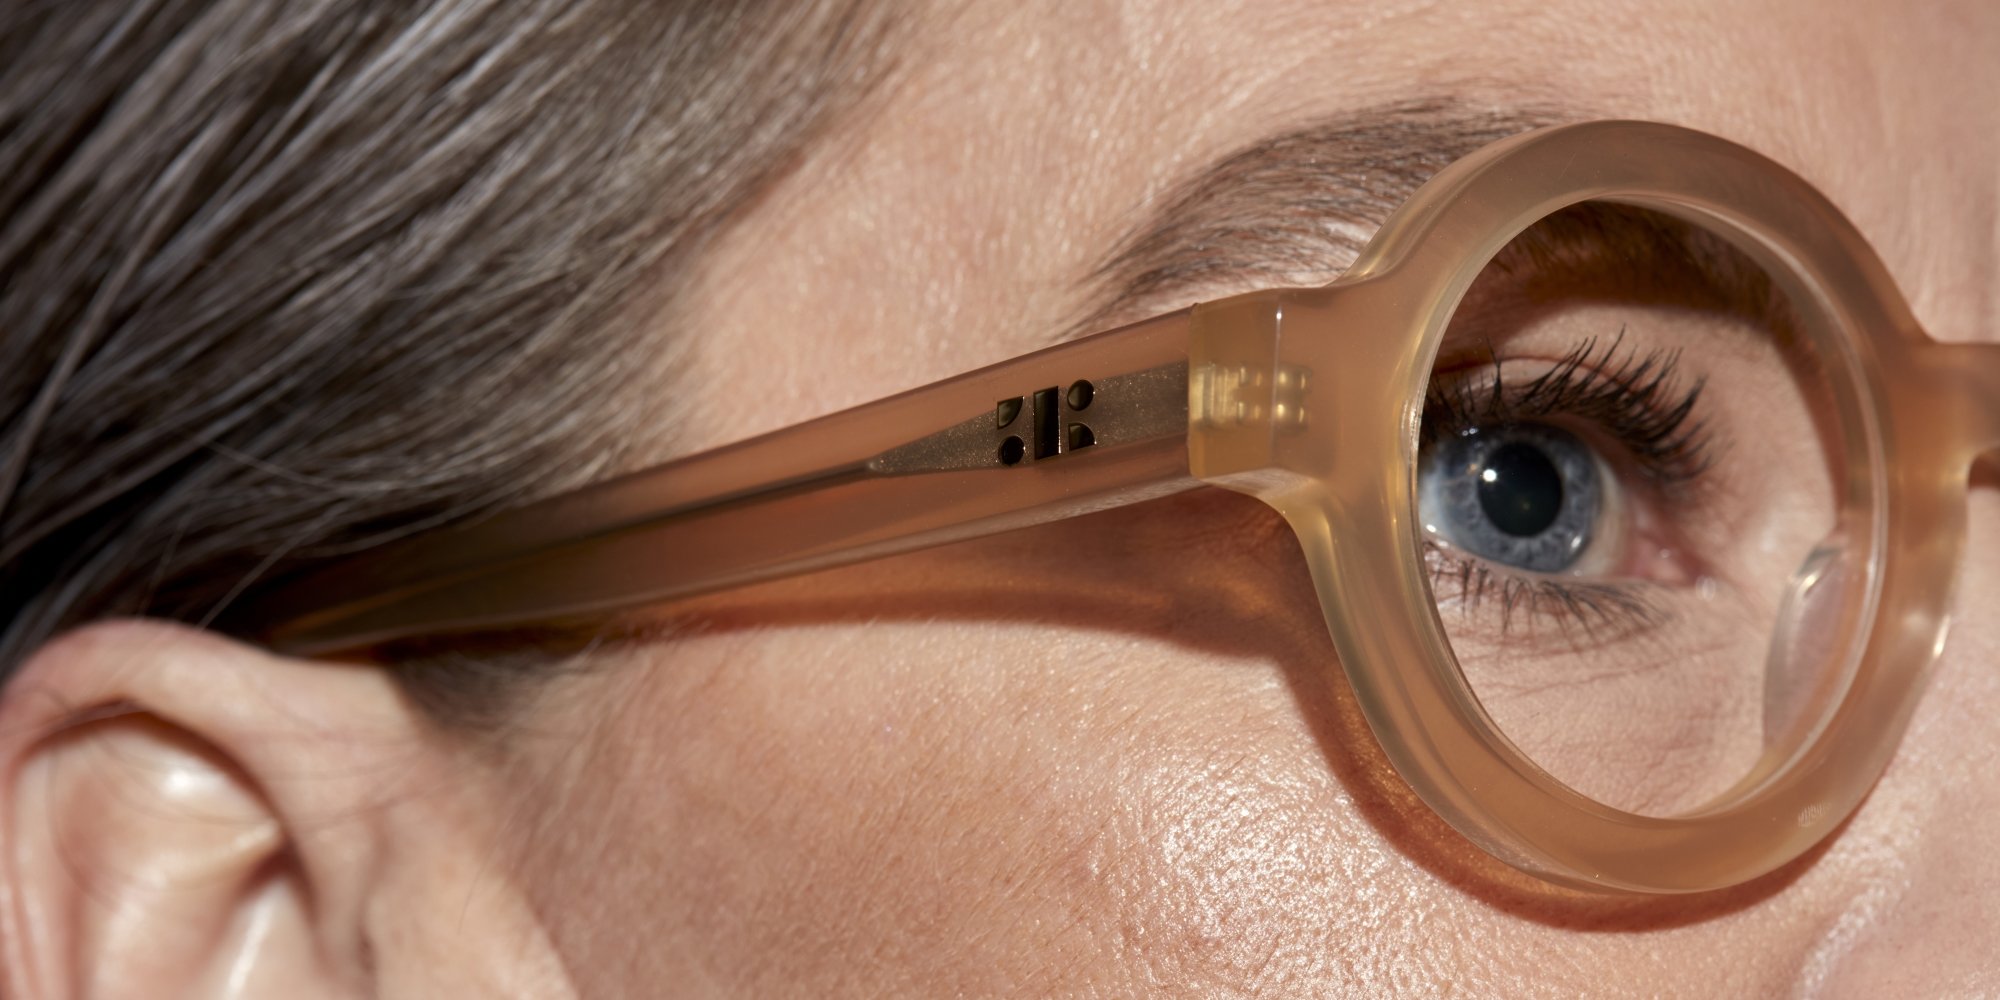 Photo Details of Lola Nude Reading Glasses in a room